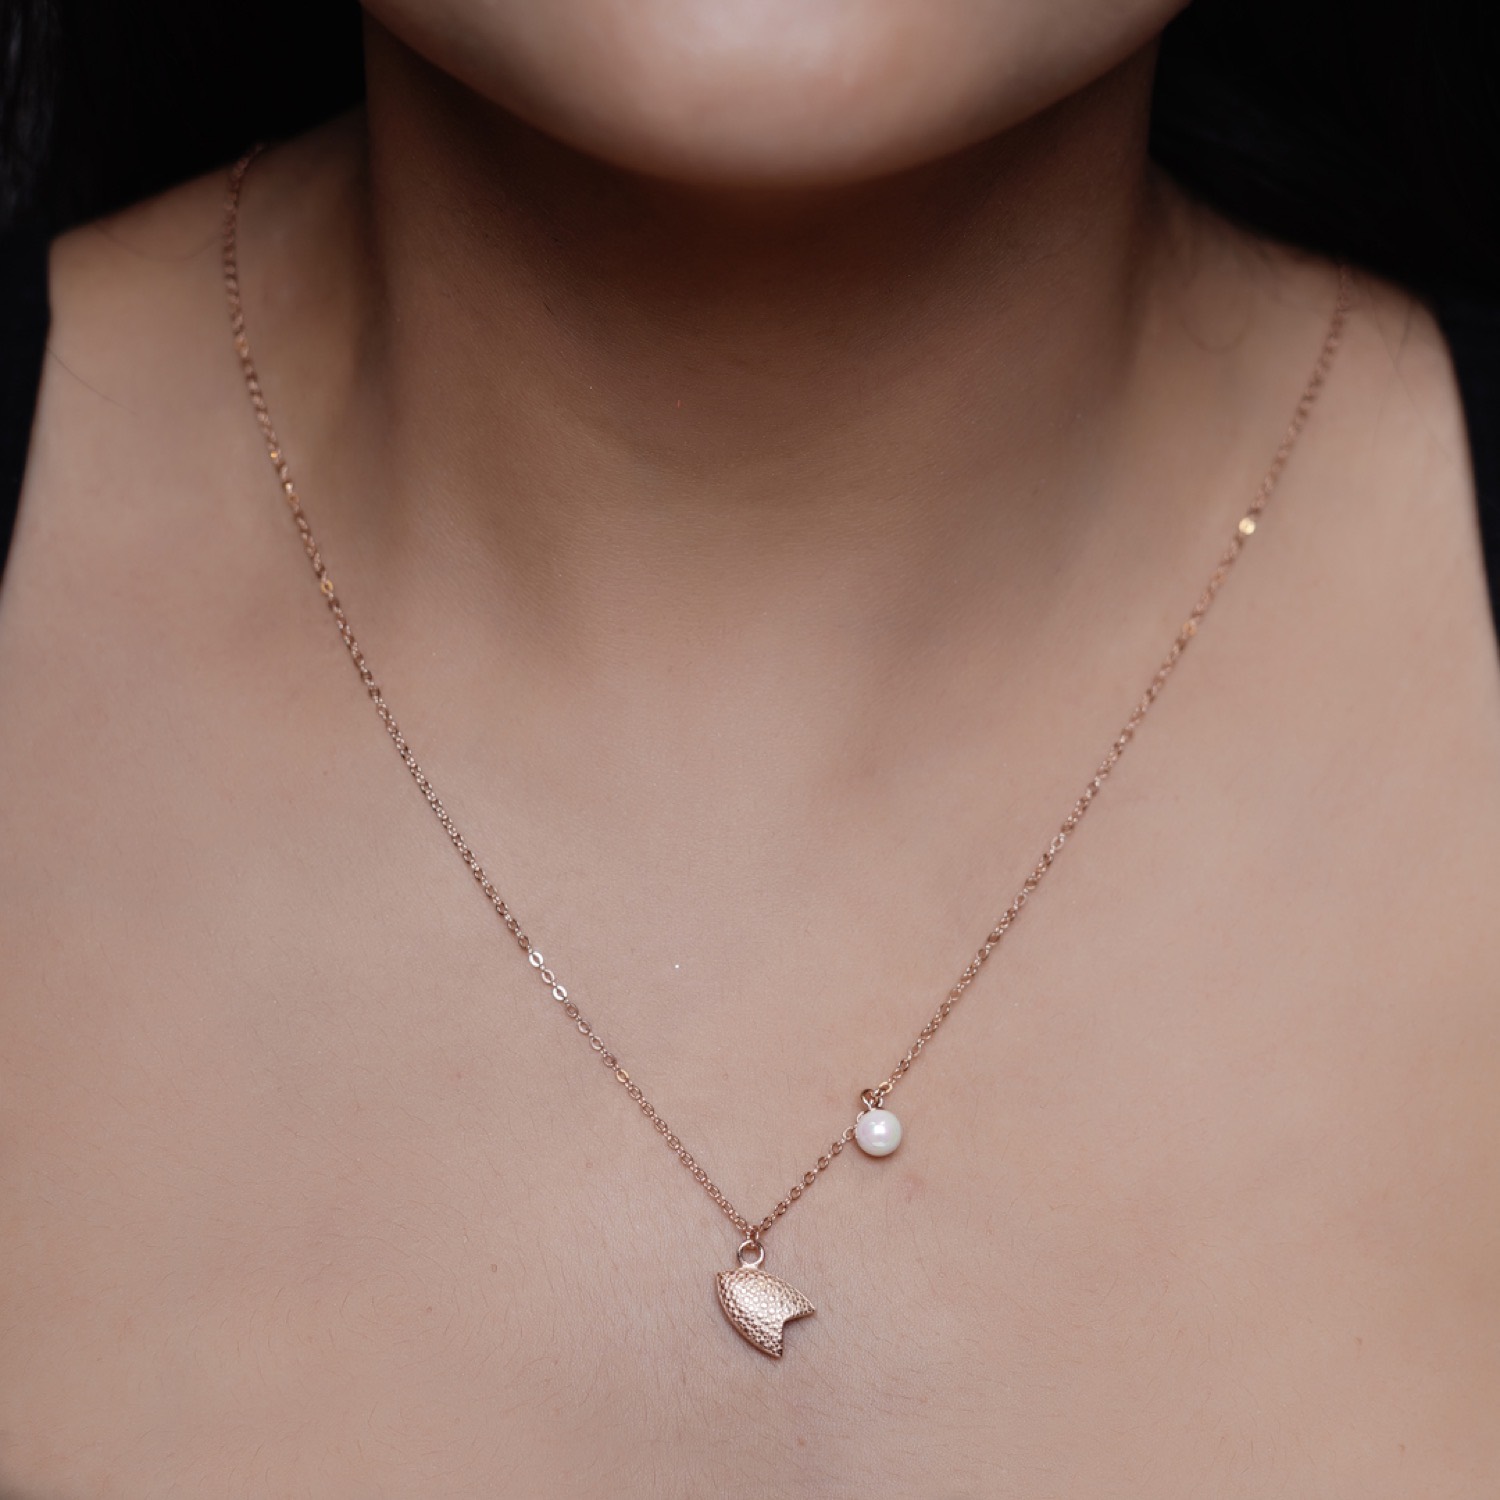 varam_chain_102022_solid_arrow_and_pearl_drop_charm_rose_gold_silver_chain-2